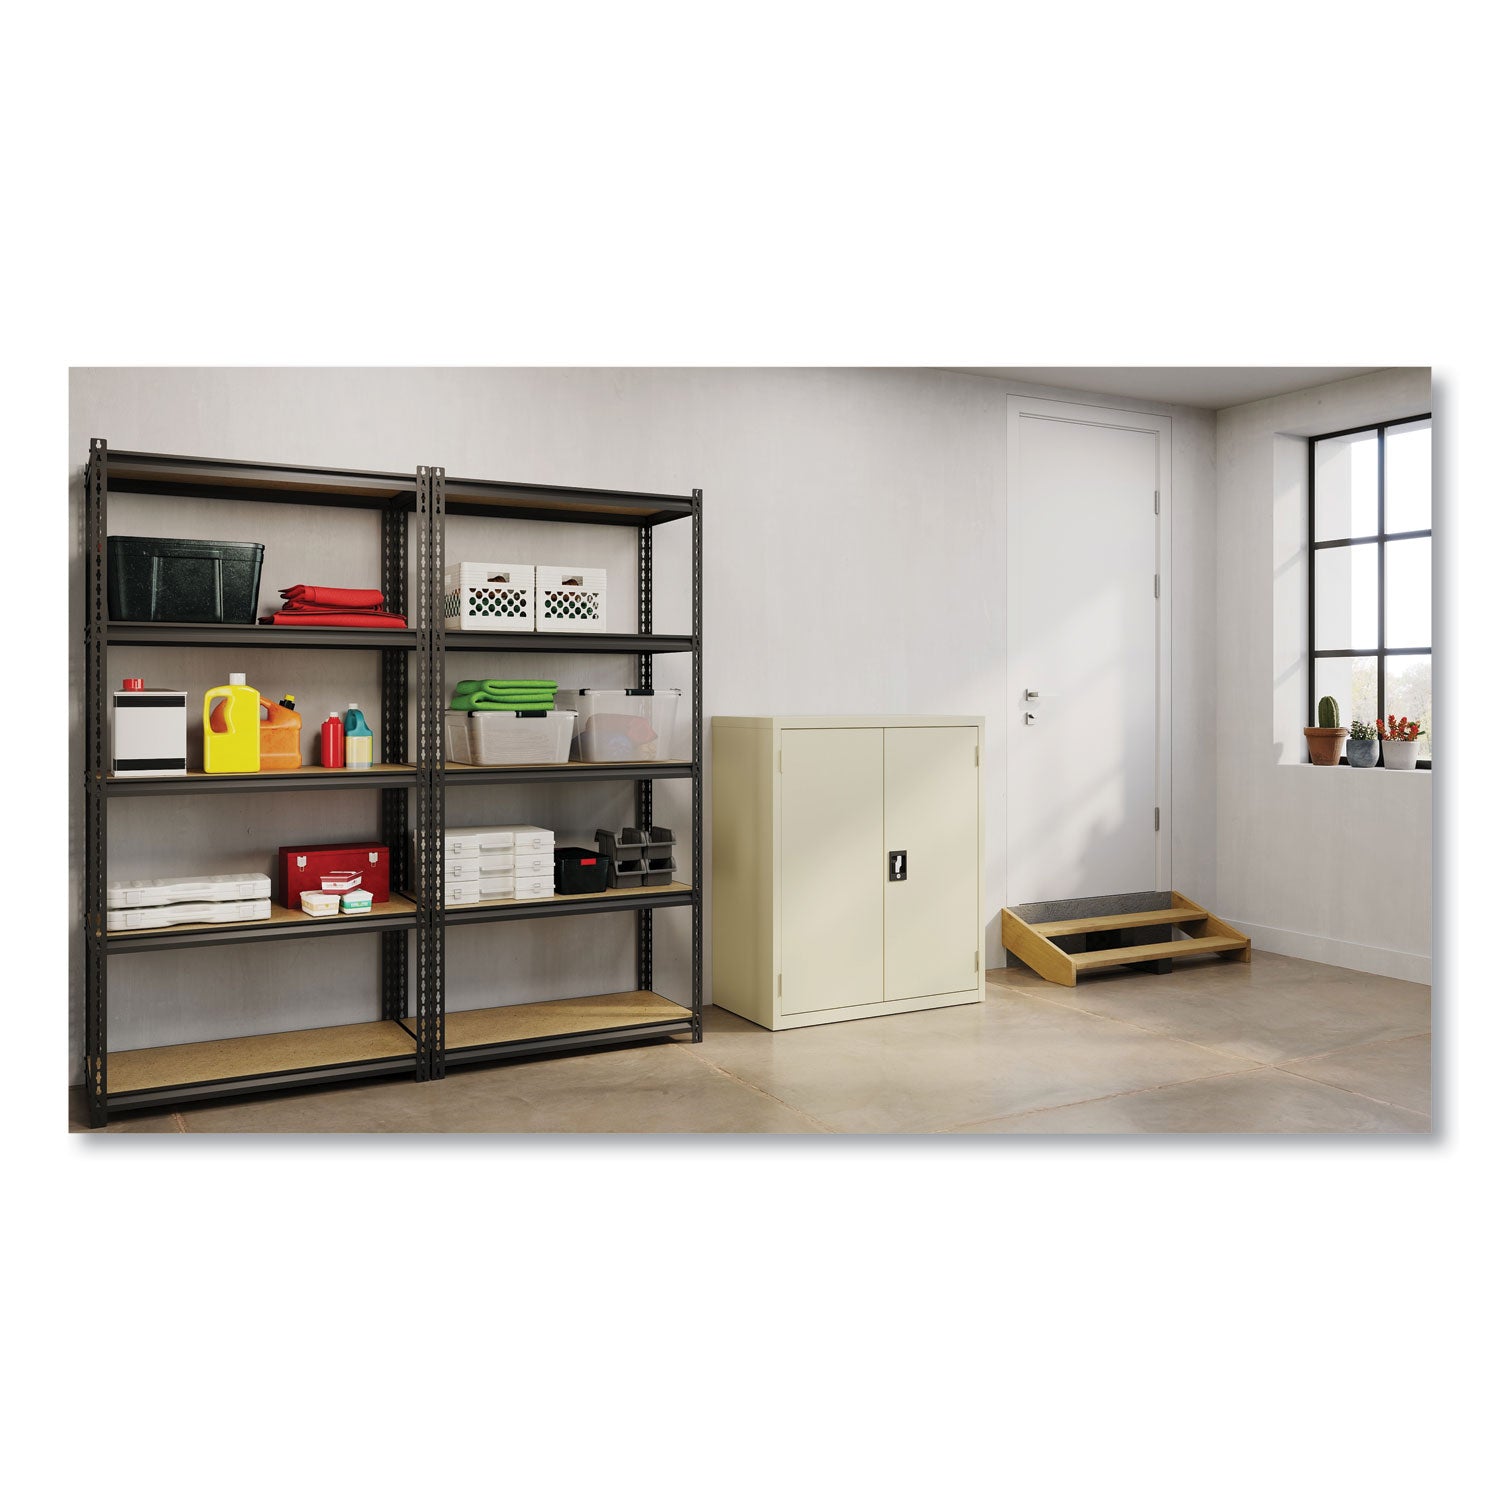 fully-assembled-storage-cabinets-3-shelves-36-x-18-x-42-putty_oifcm4218py - 5